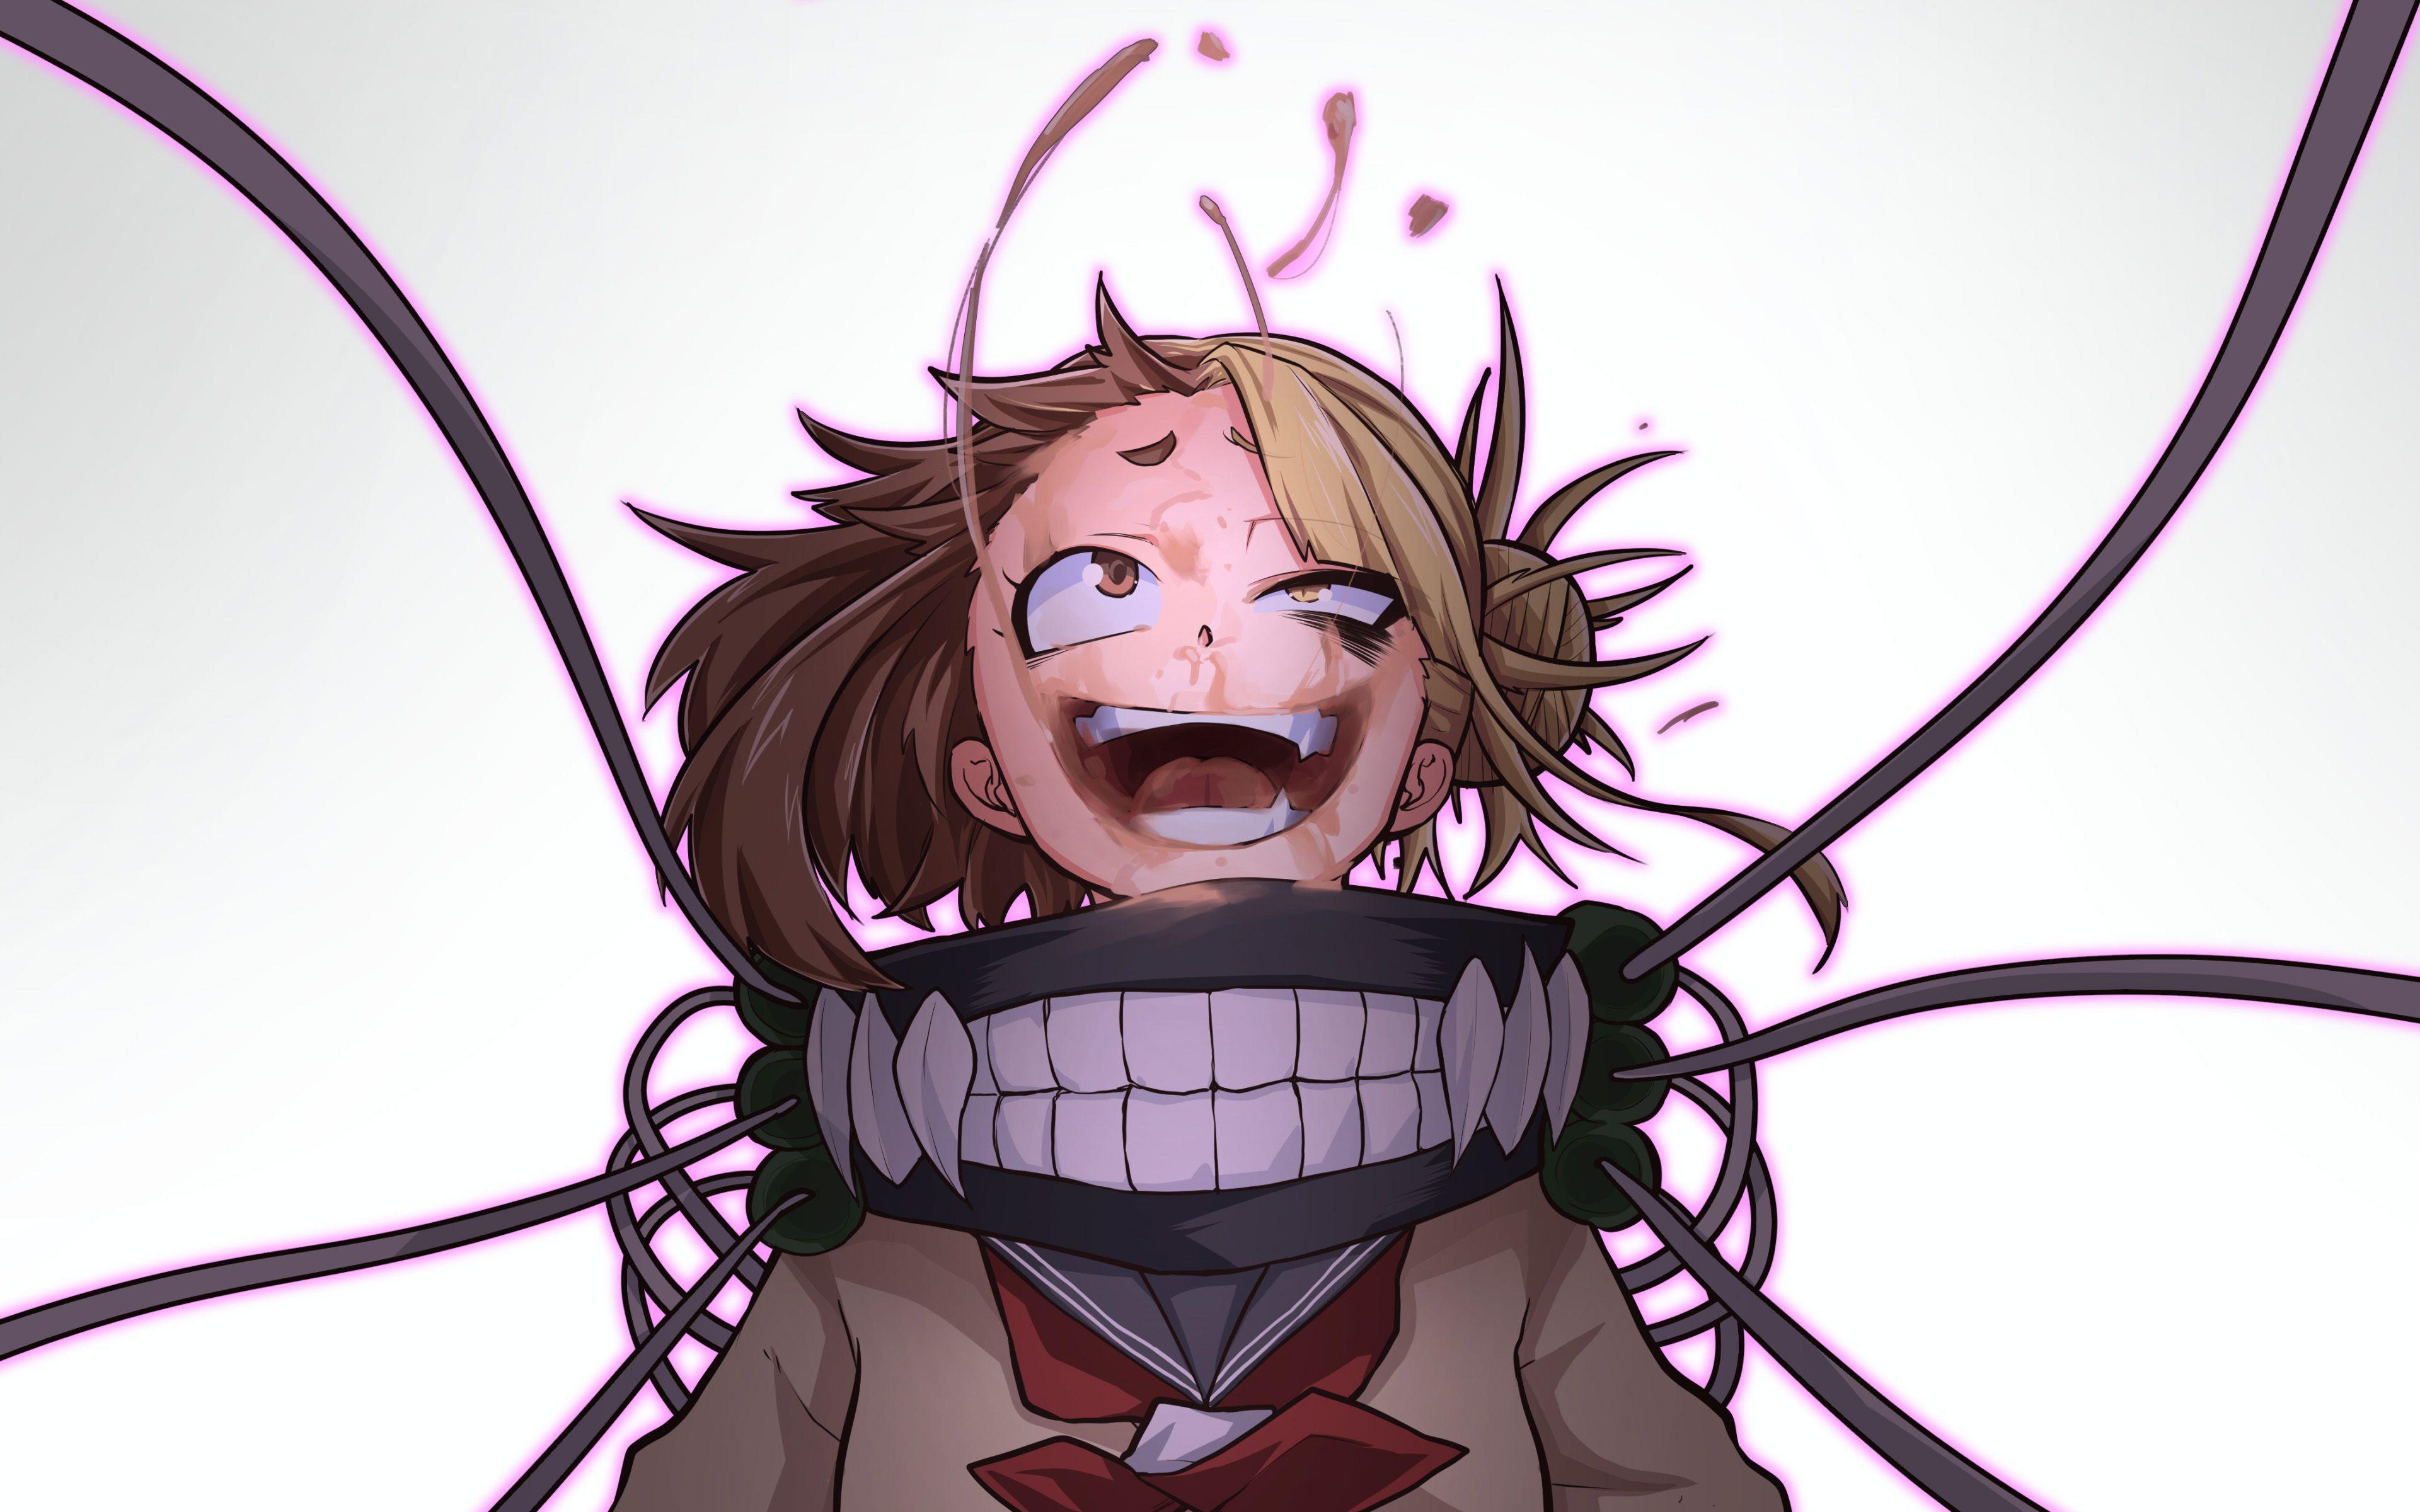 Himiko Toga Wallpapers - Top Free Himiko Toga Backgrounds - WallpaperAccess